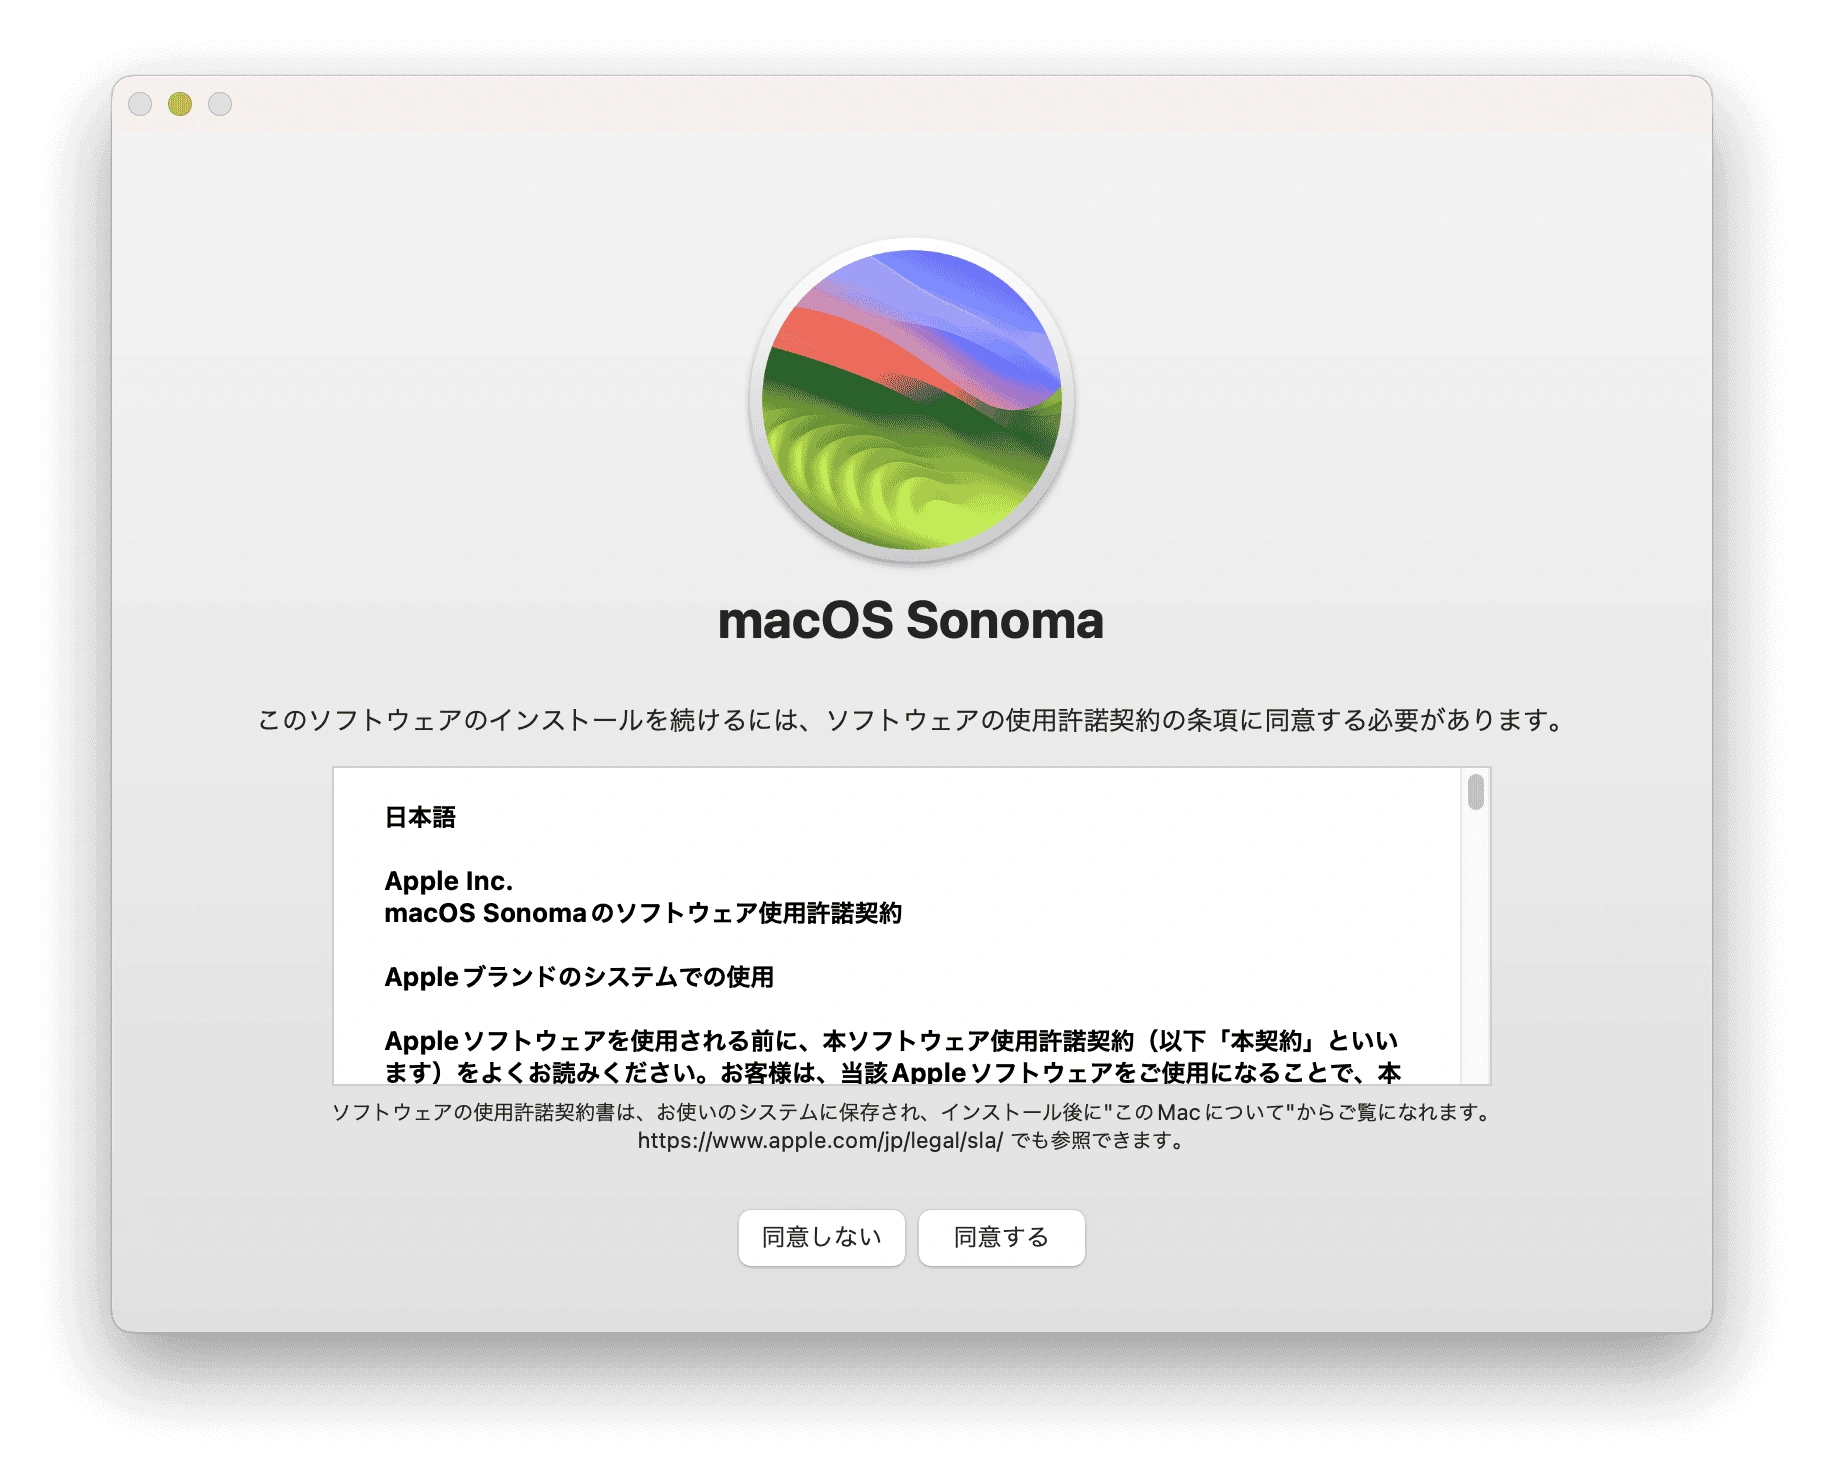 install-macos-sonoma-jp.png